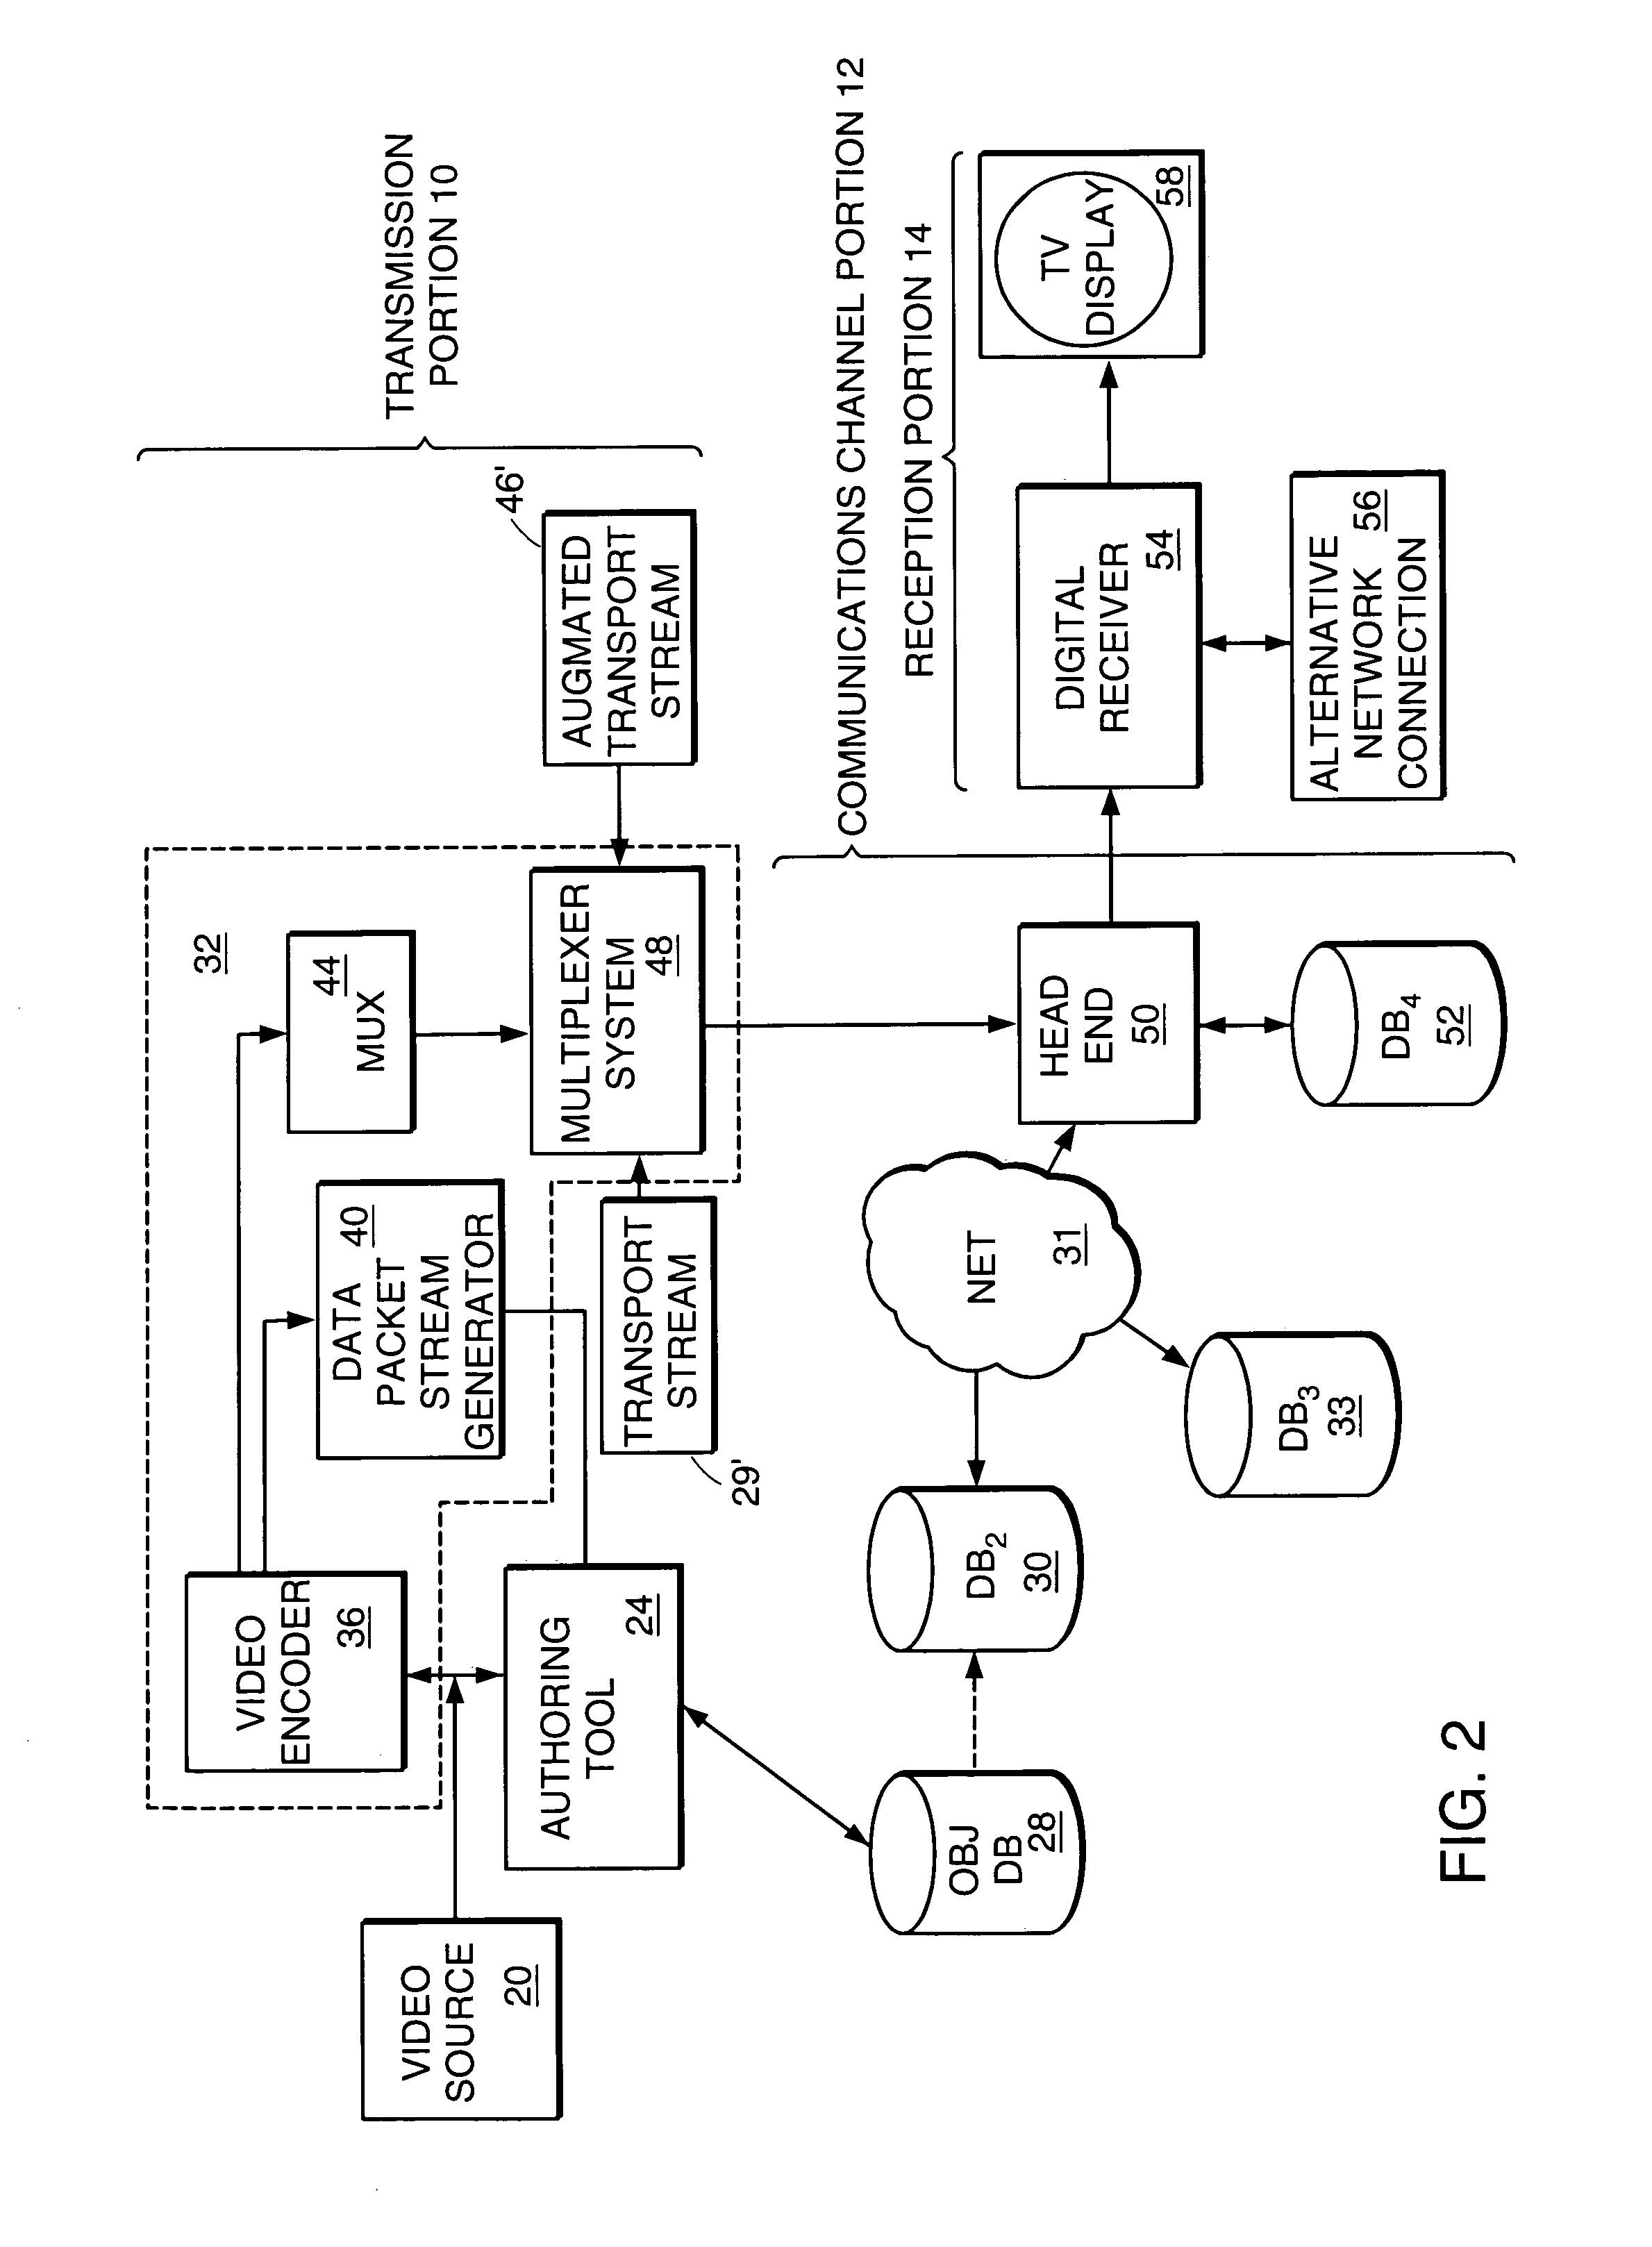 Method and apparatus for interaction with hyperlinks in a television broadcast